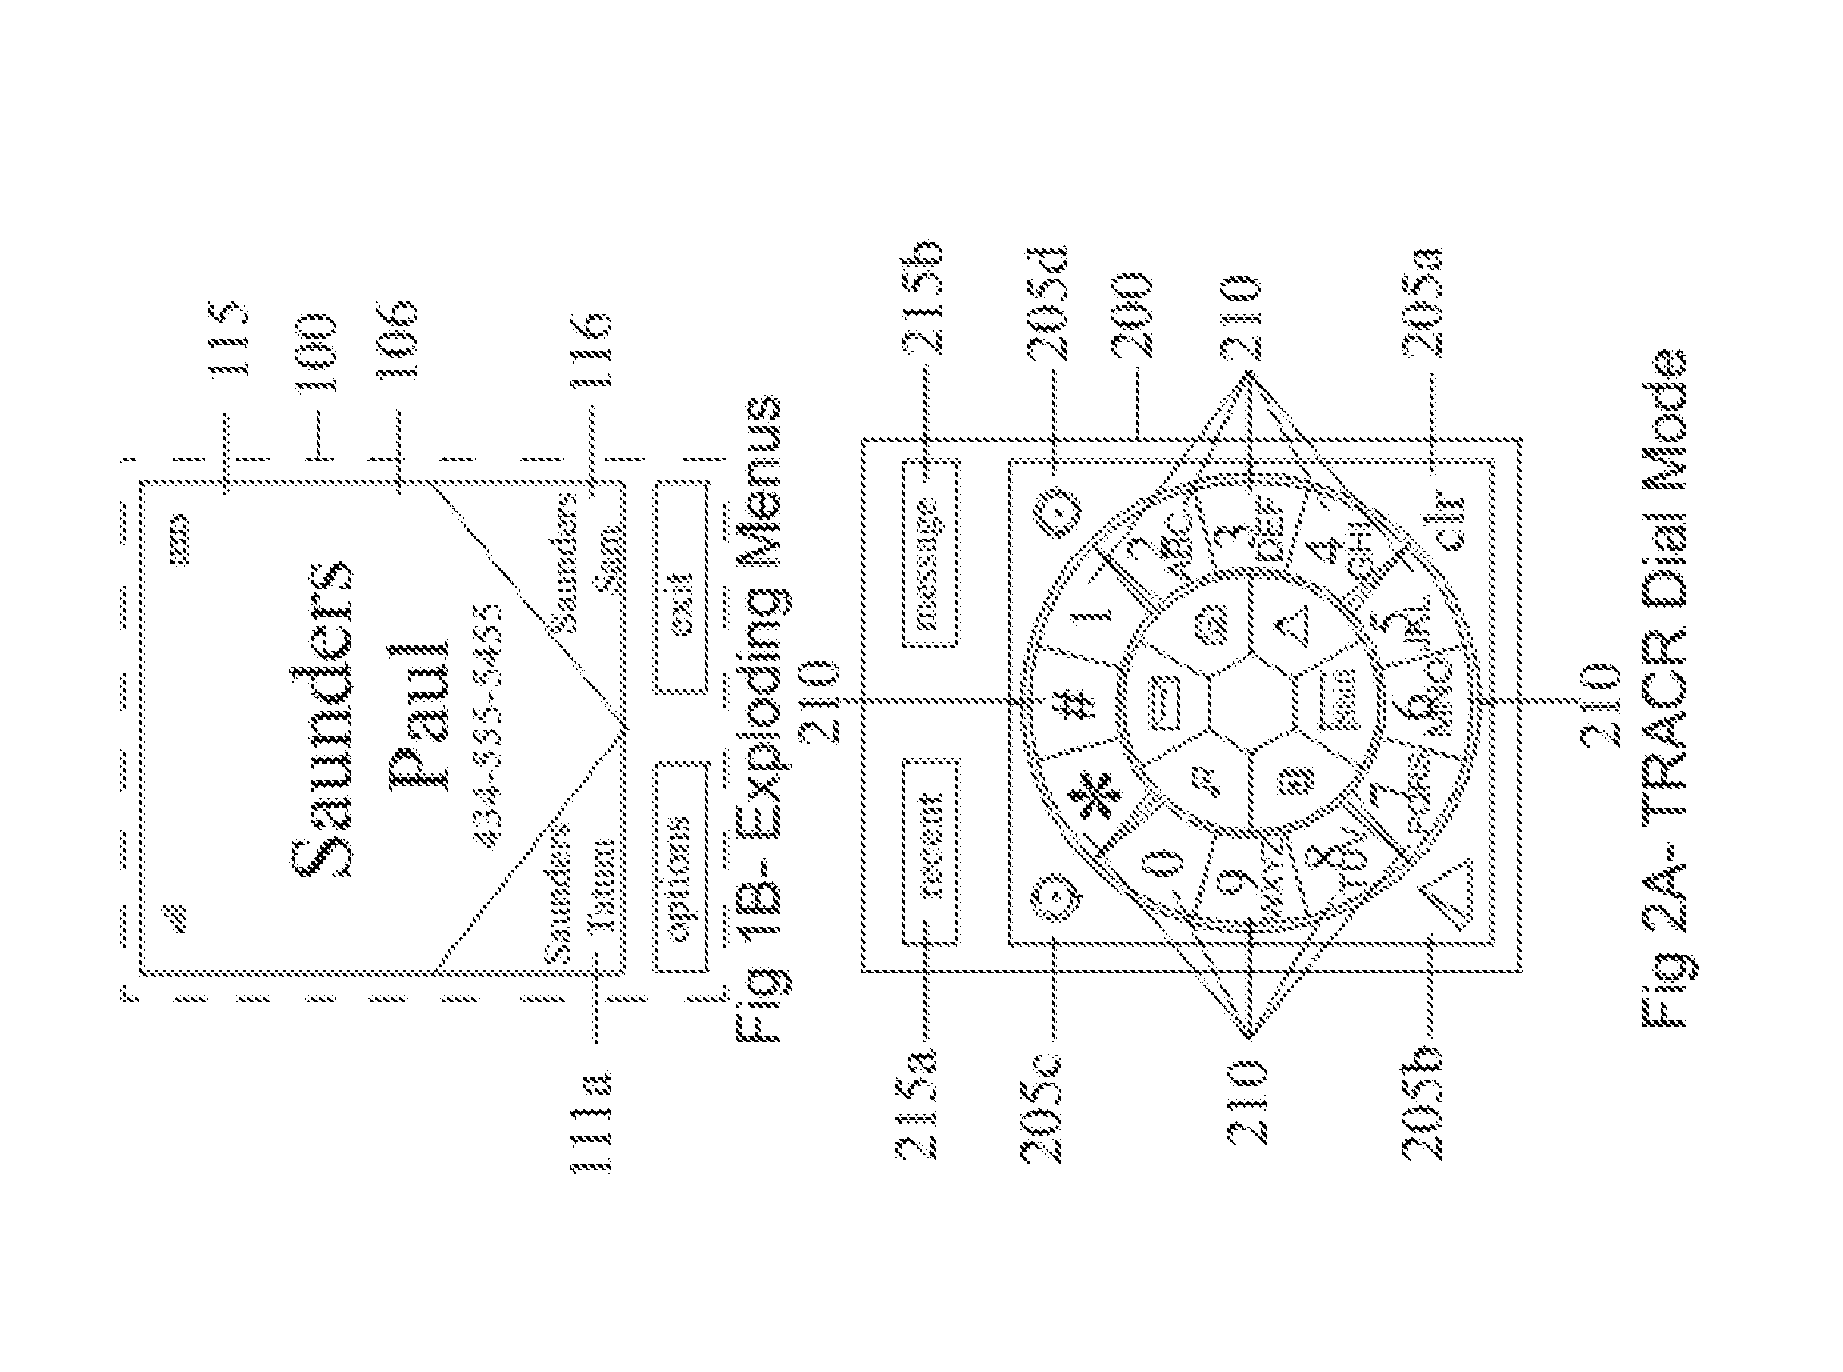 Dynamic visual feature coordination in an electronic hand held device